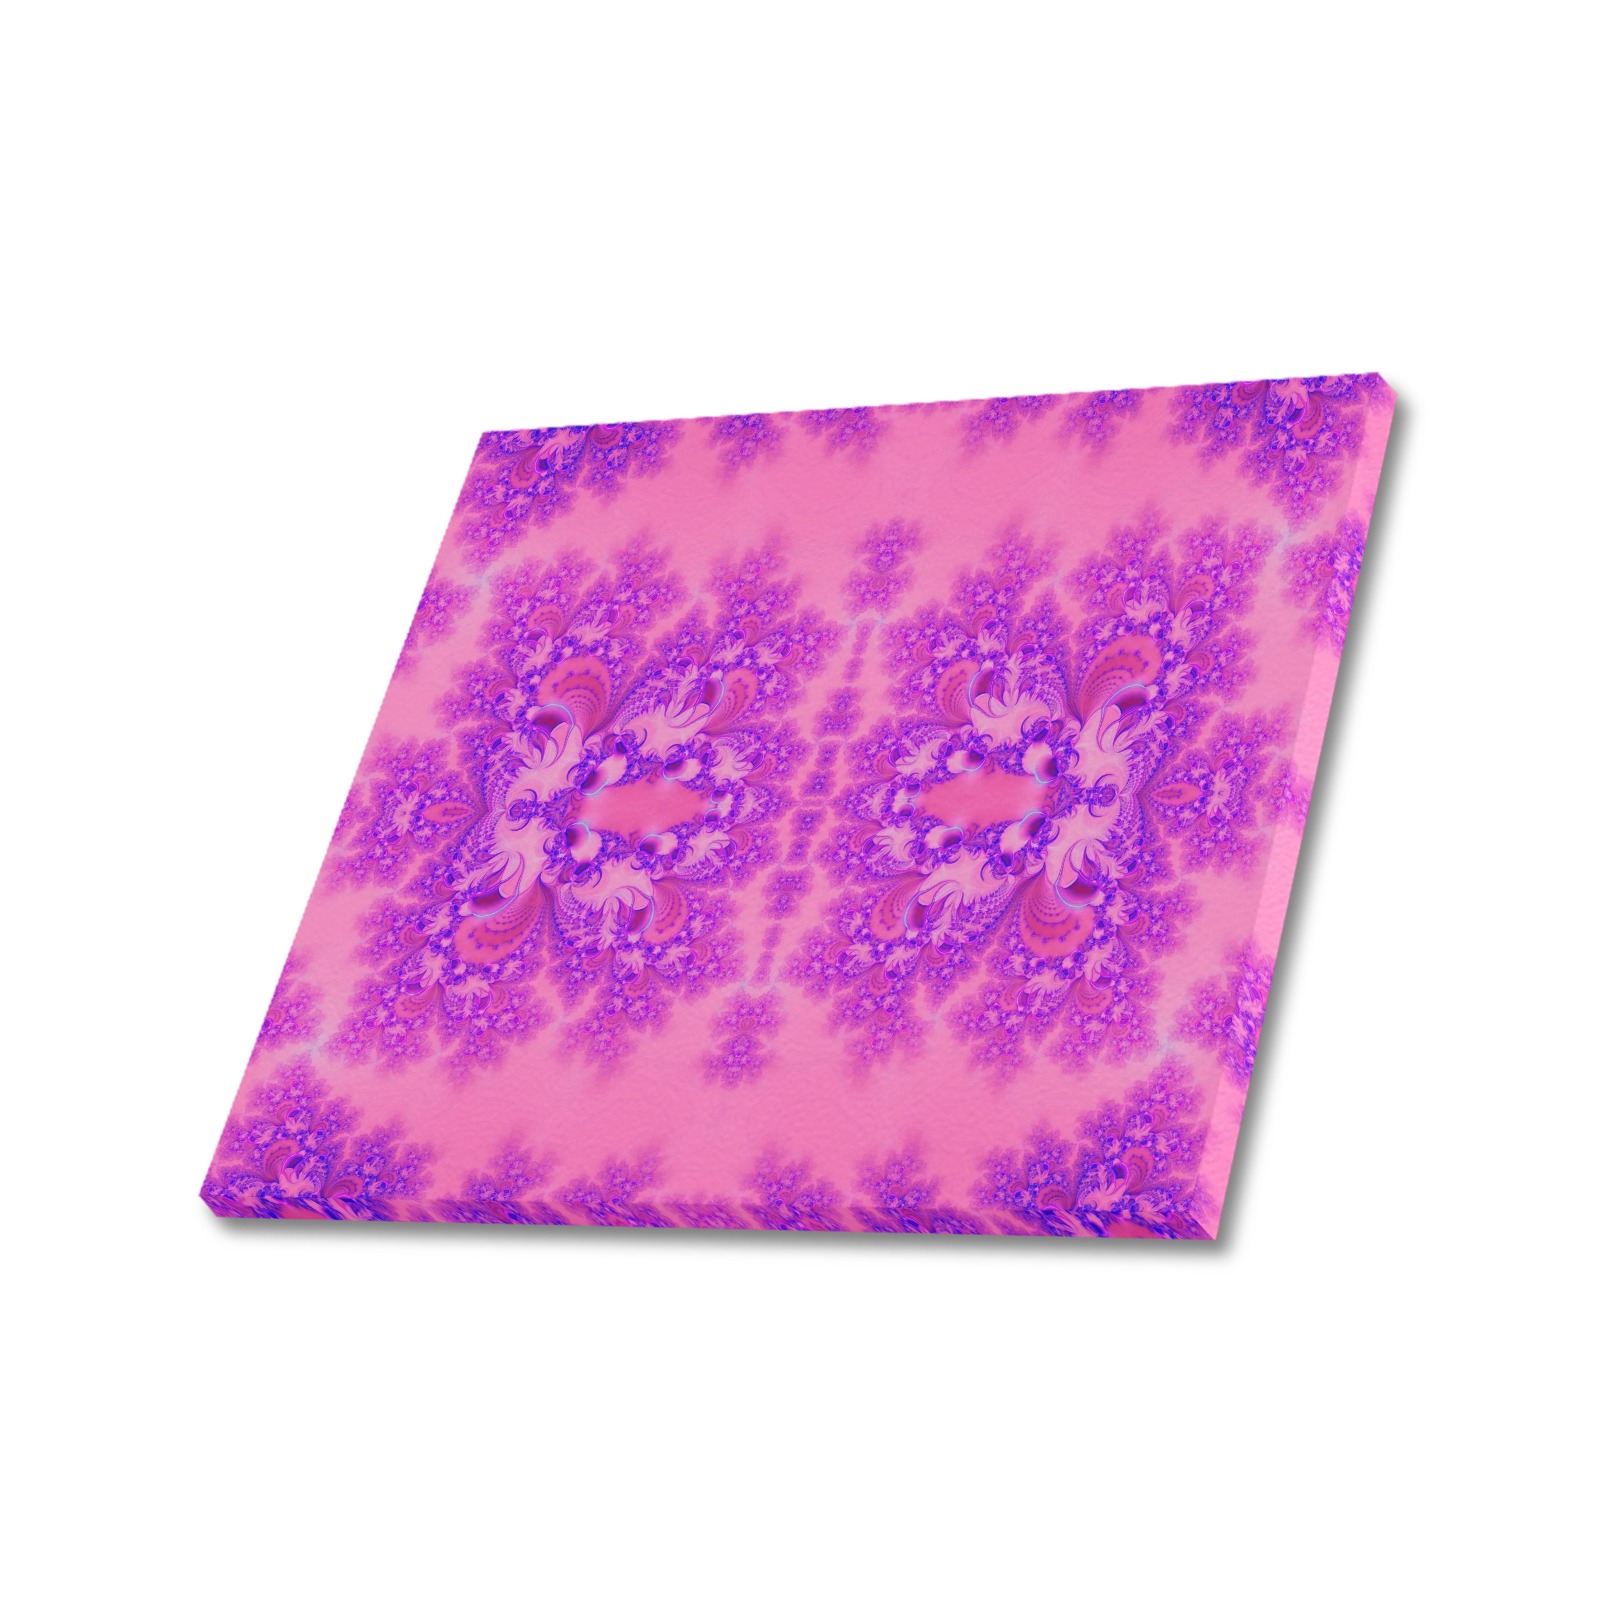 Purple and Pink Hydrangeas Frost Fractal Frame Canvas Print 24"x20"